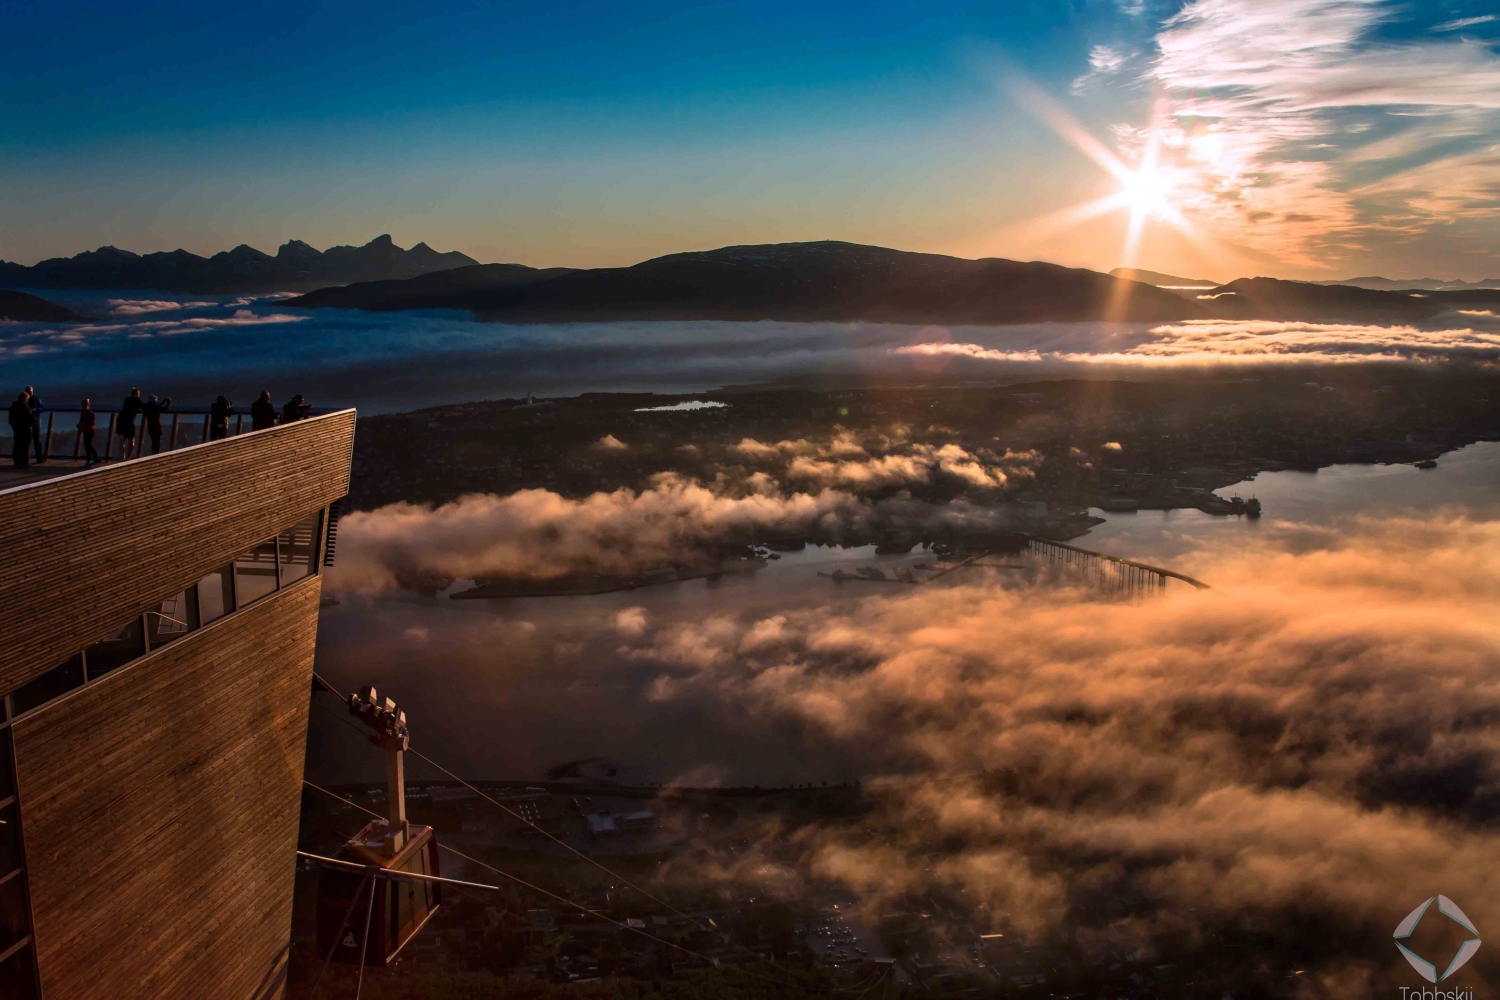 Midnight sun over Tromsø from the Cable Car